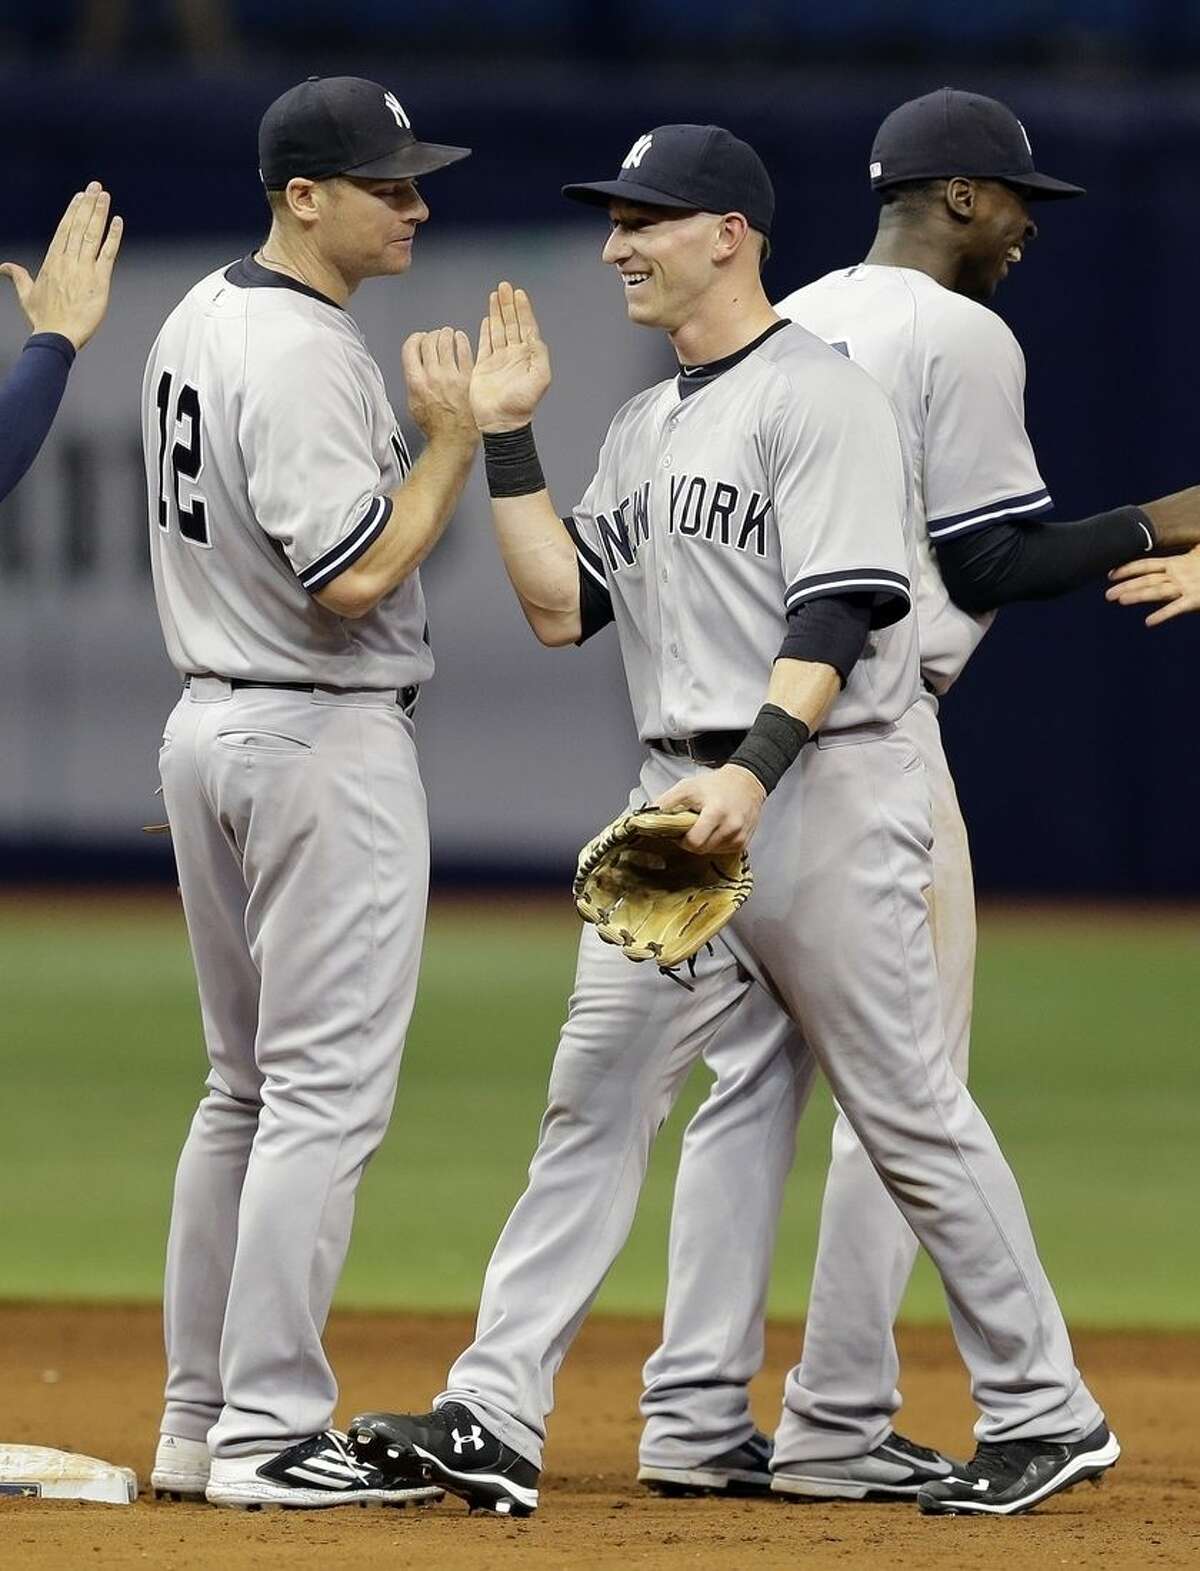 New York Yankees' Slade Heathcott, center, celebrates with teammates, including Chase Headley, left, and Didi Gregorius, right, after the Yankees defeated the Tampa Bay Rays 4-1 during a baseball game Monday, Sept. 14, 2015, in St. Petersburg, Fla. Heathcott had a three-run home run in the win. (AP Photo/Chris O'Meara)